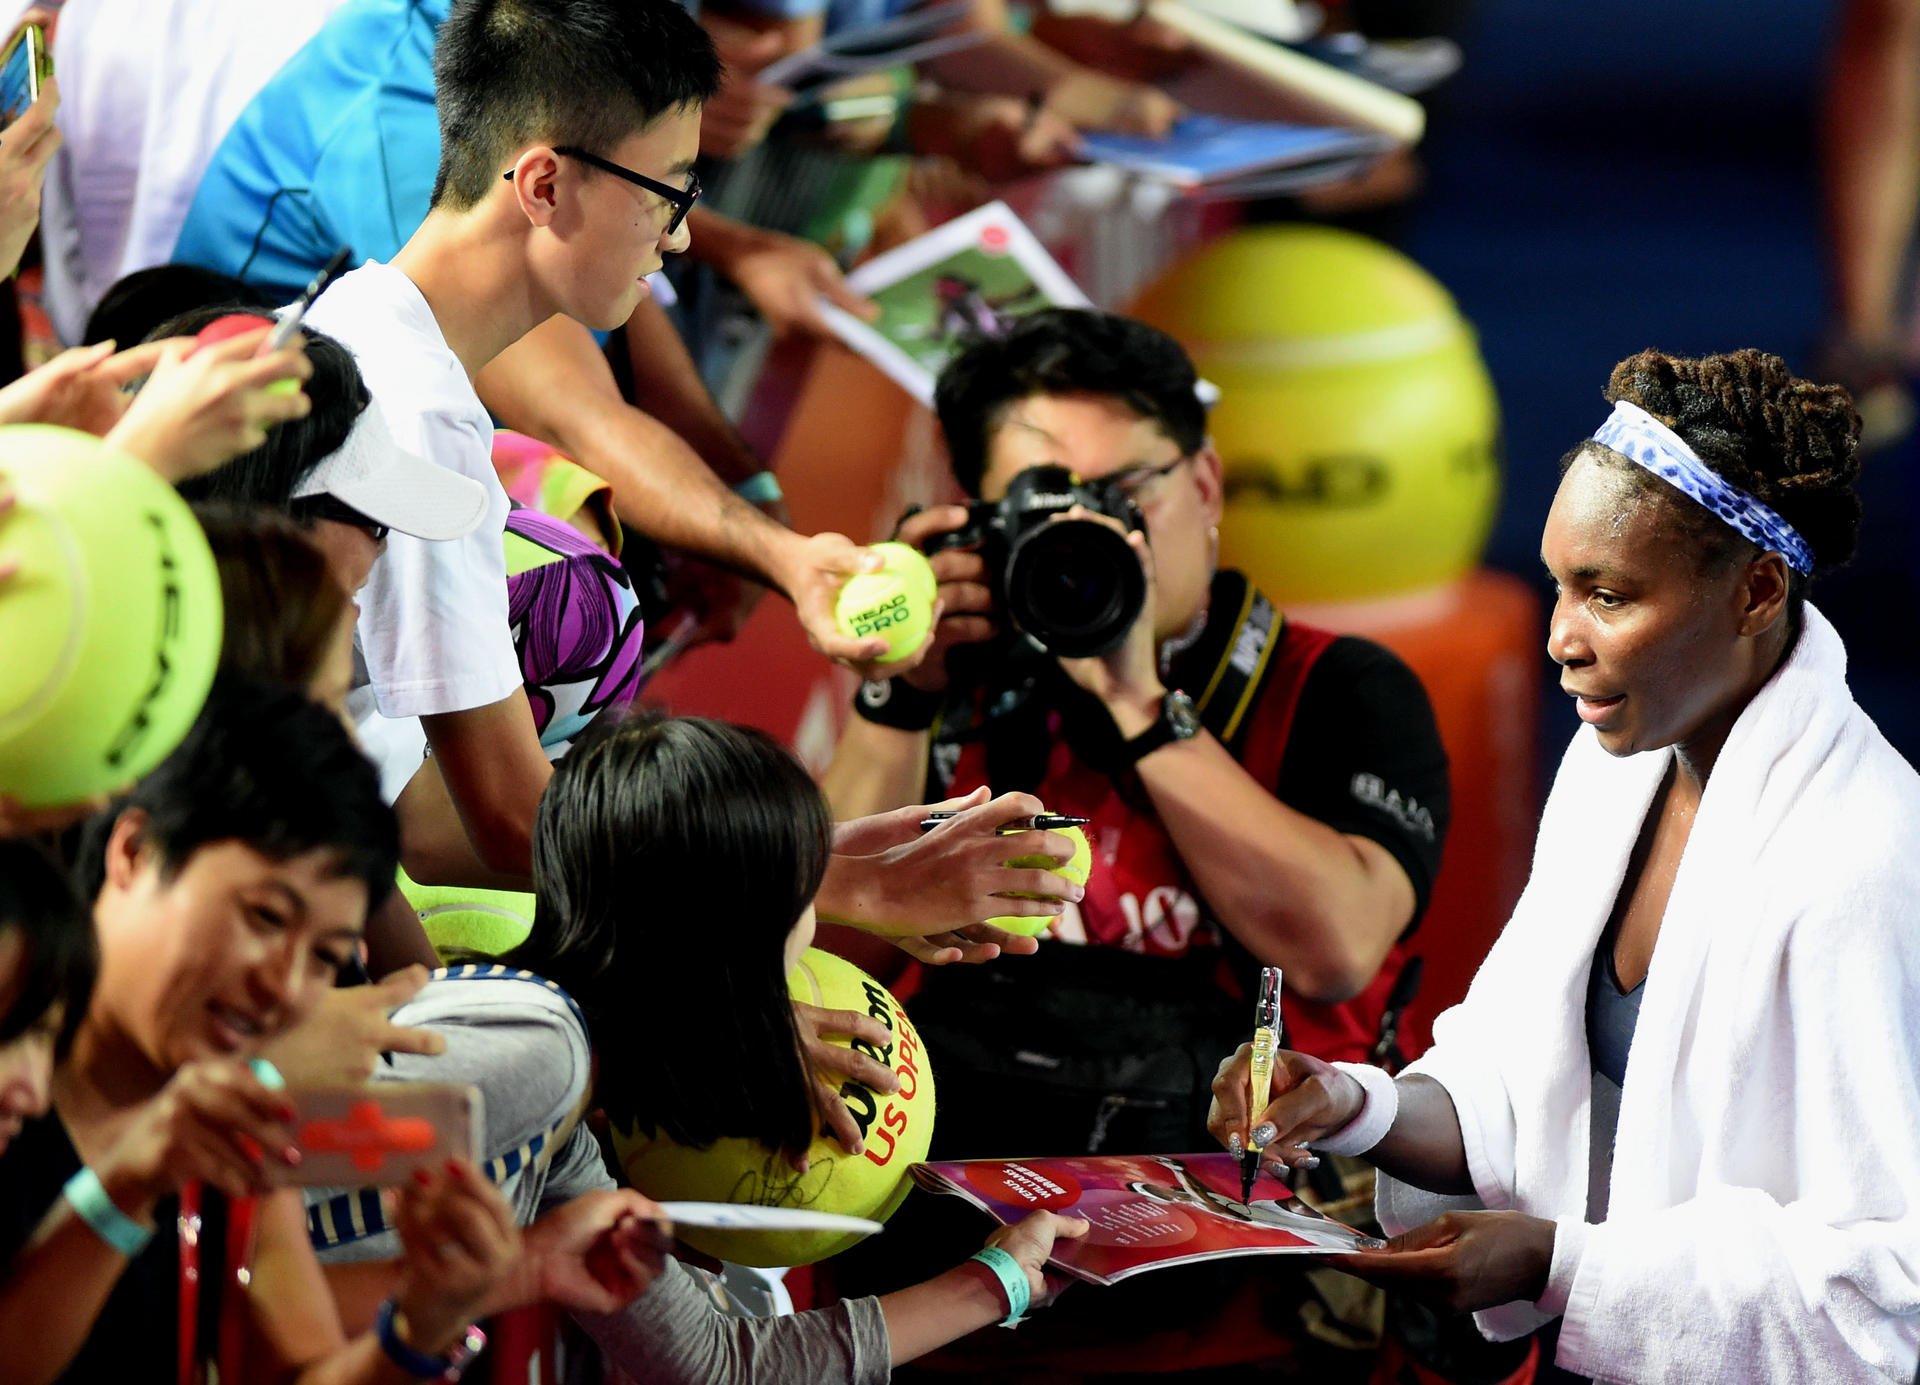 Venus Williams, who bowed out in the semi-finals, was a crowd favourite at this year's Prudential Hong Kong Open. Photo: Xinhua